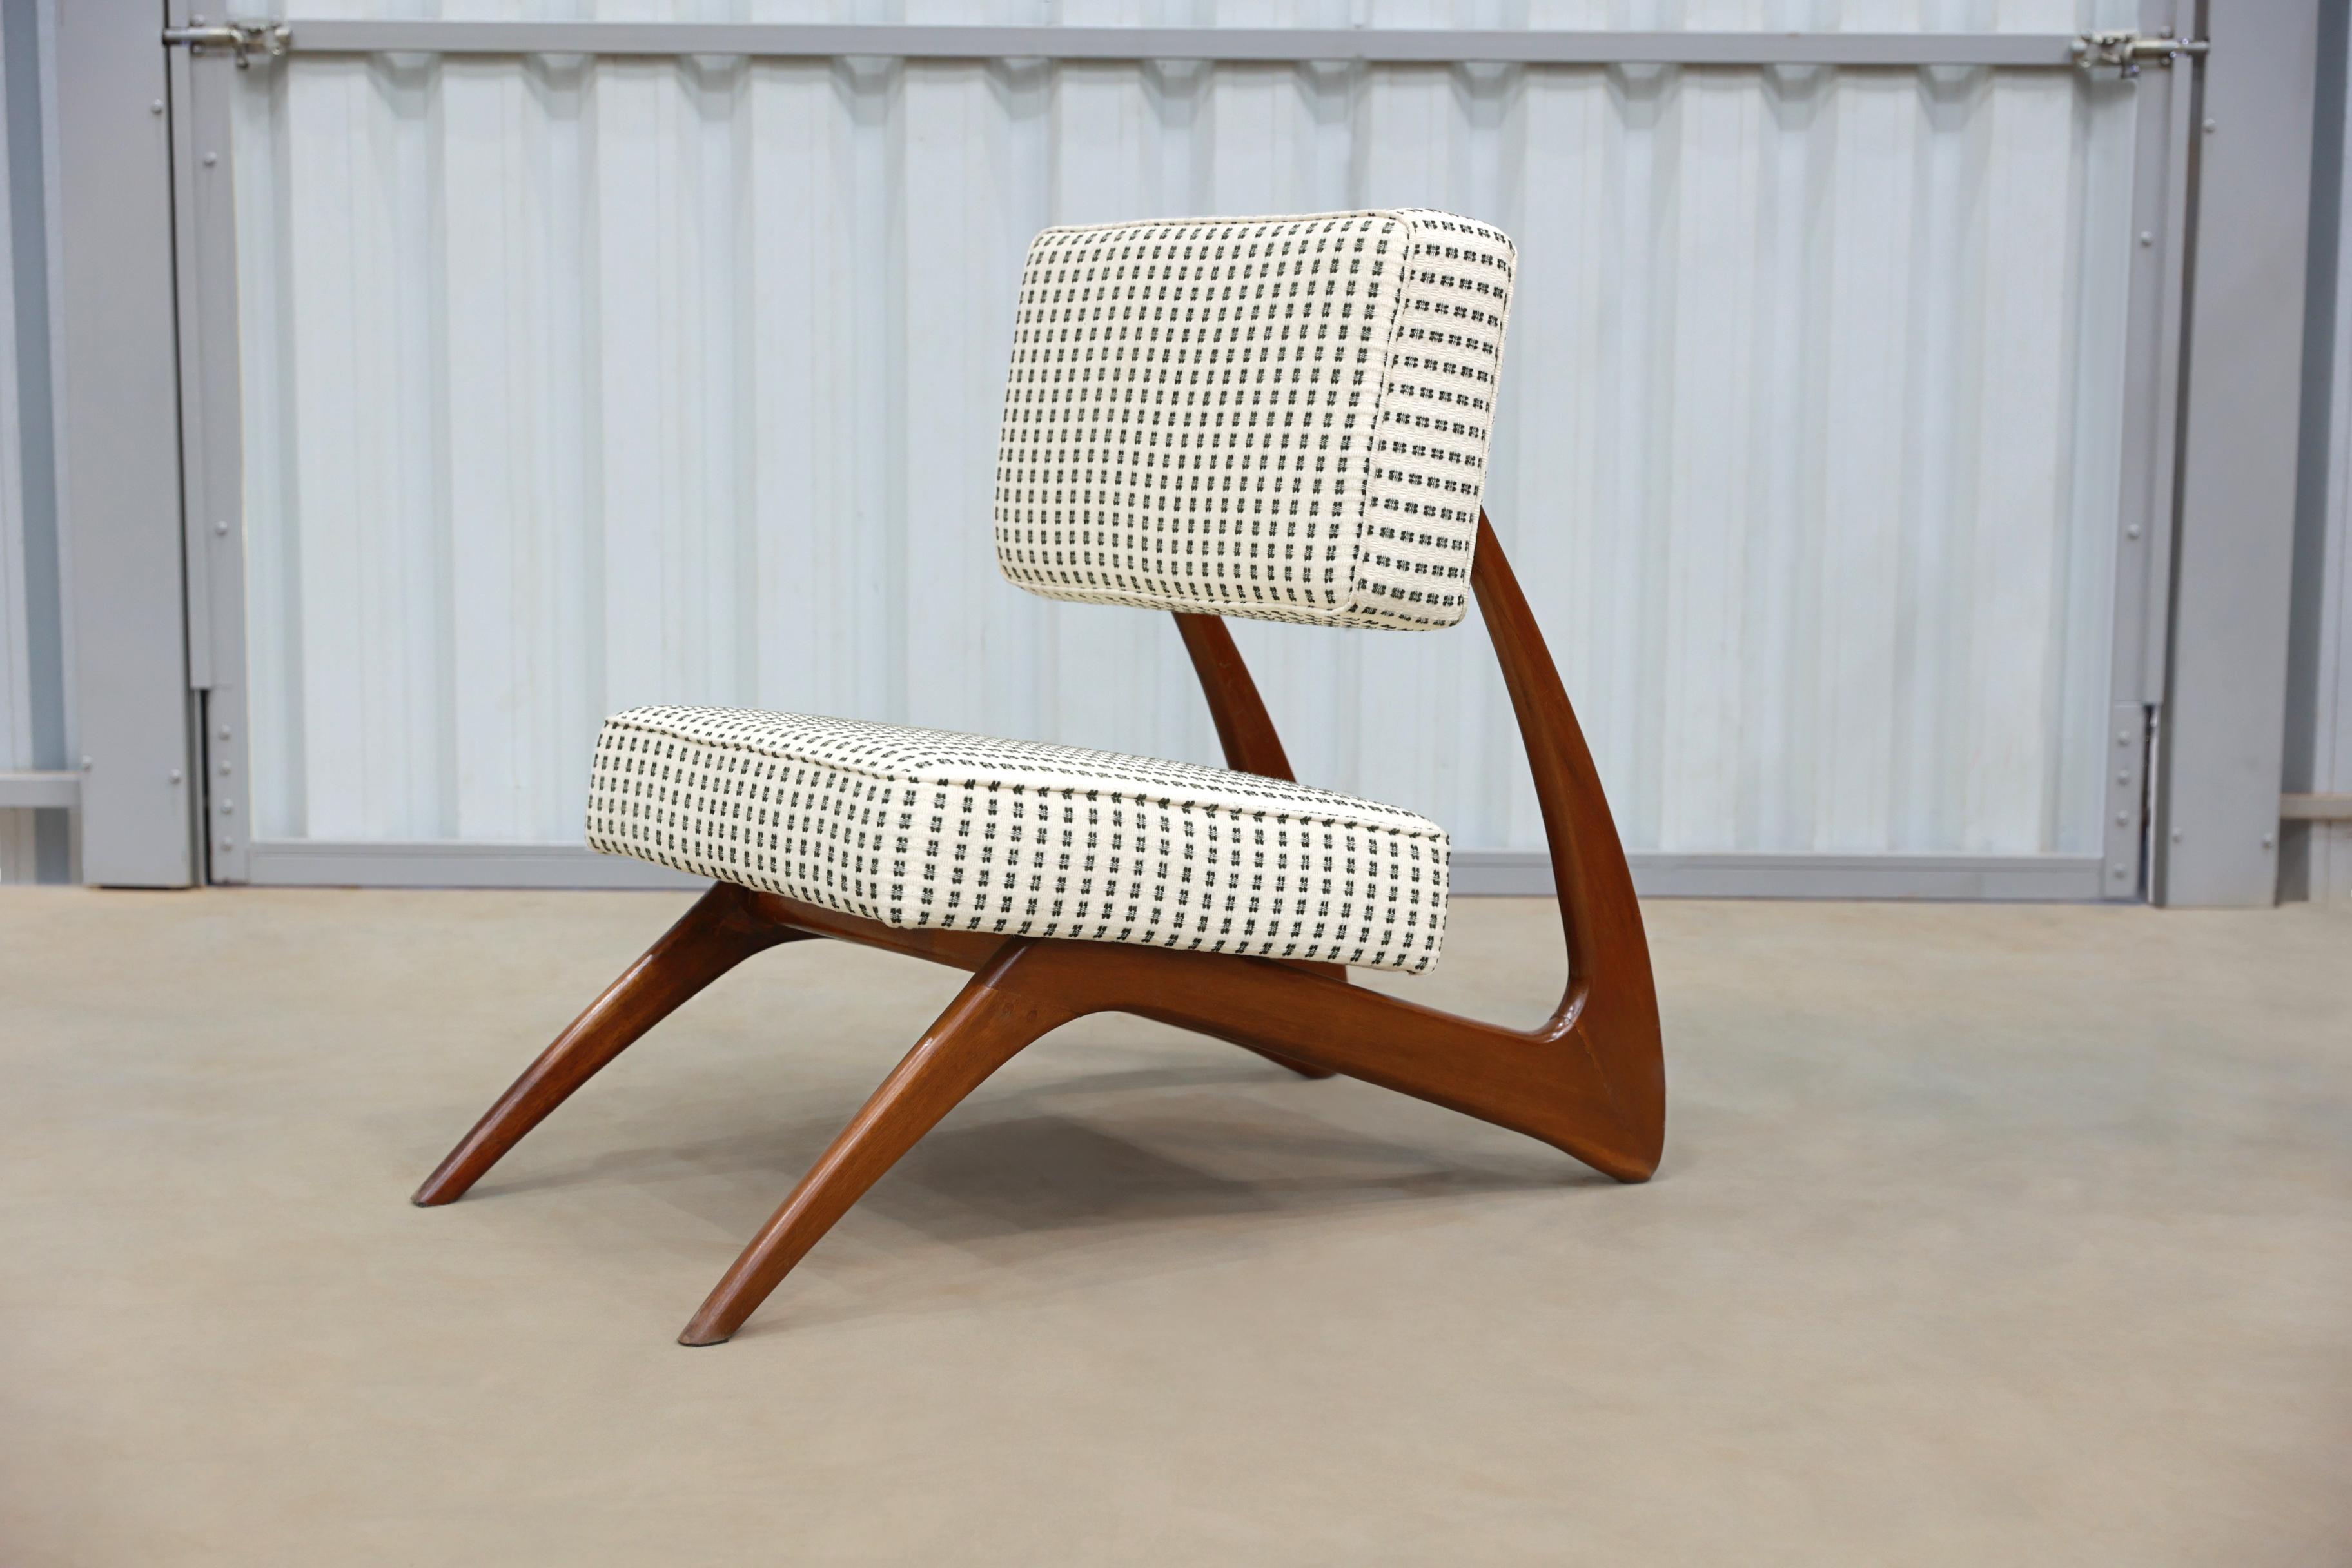 20th Century Brazilian Modern Lounge Chair in hardwood by Moveis Cimo, Brazil, 1950s For Sale